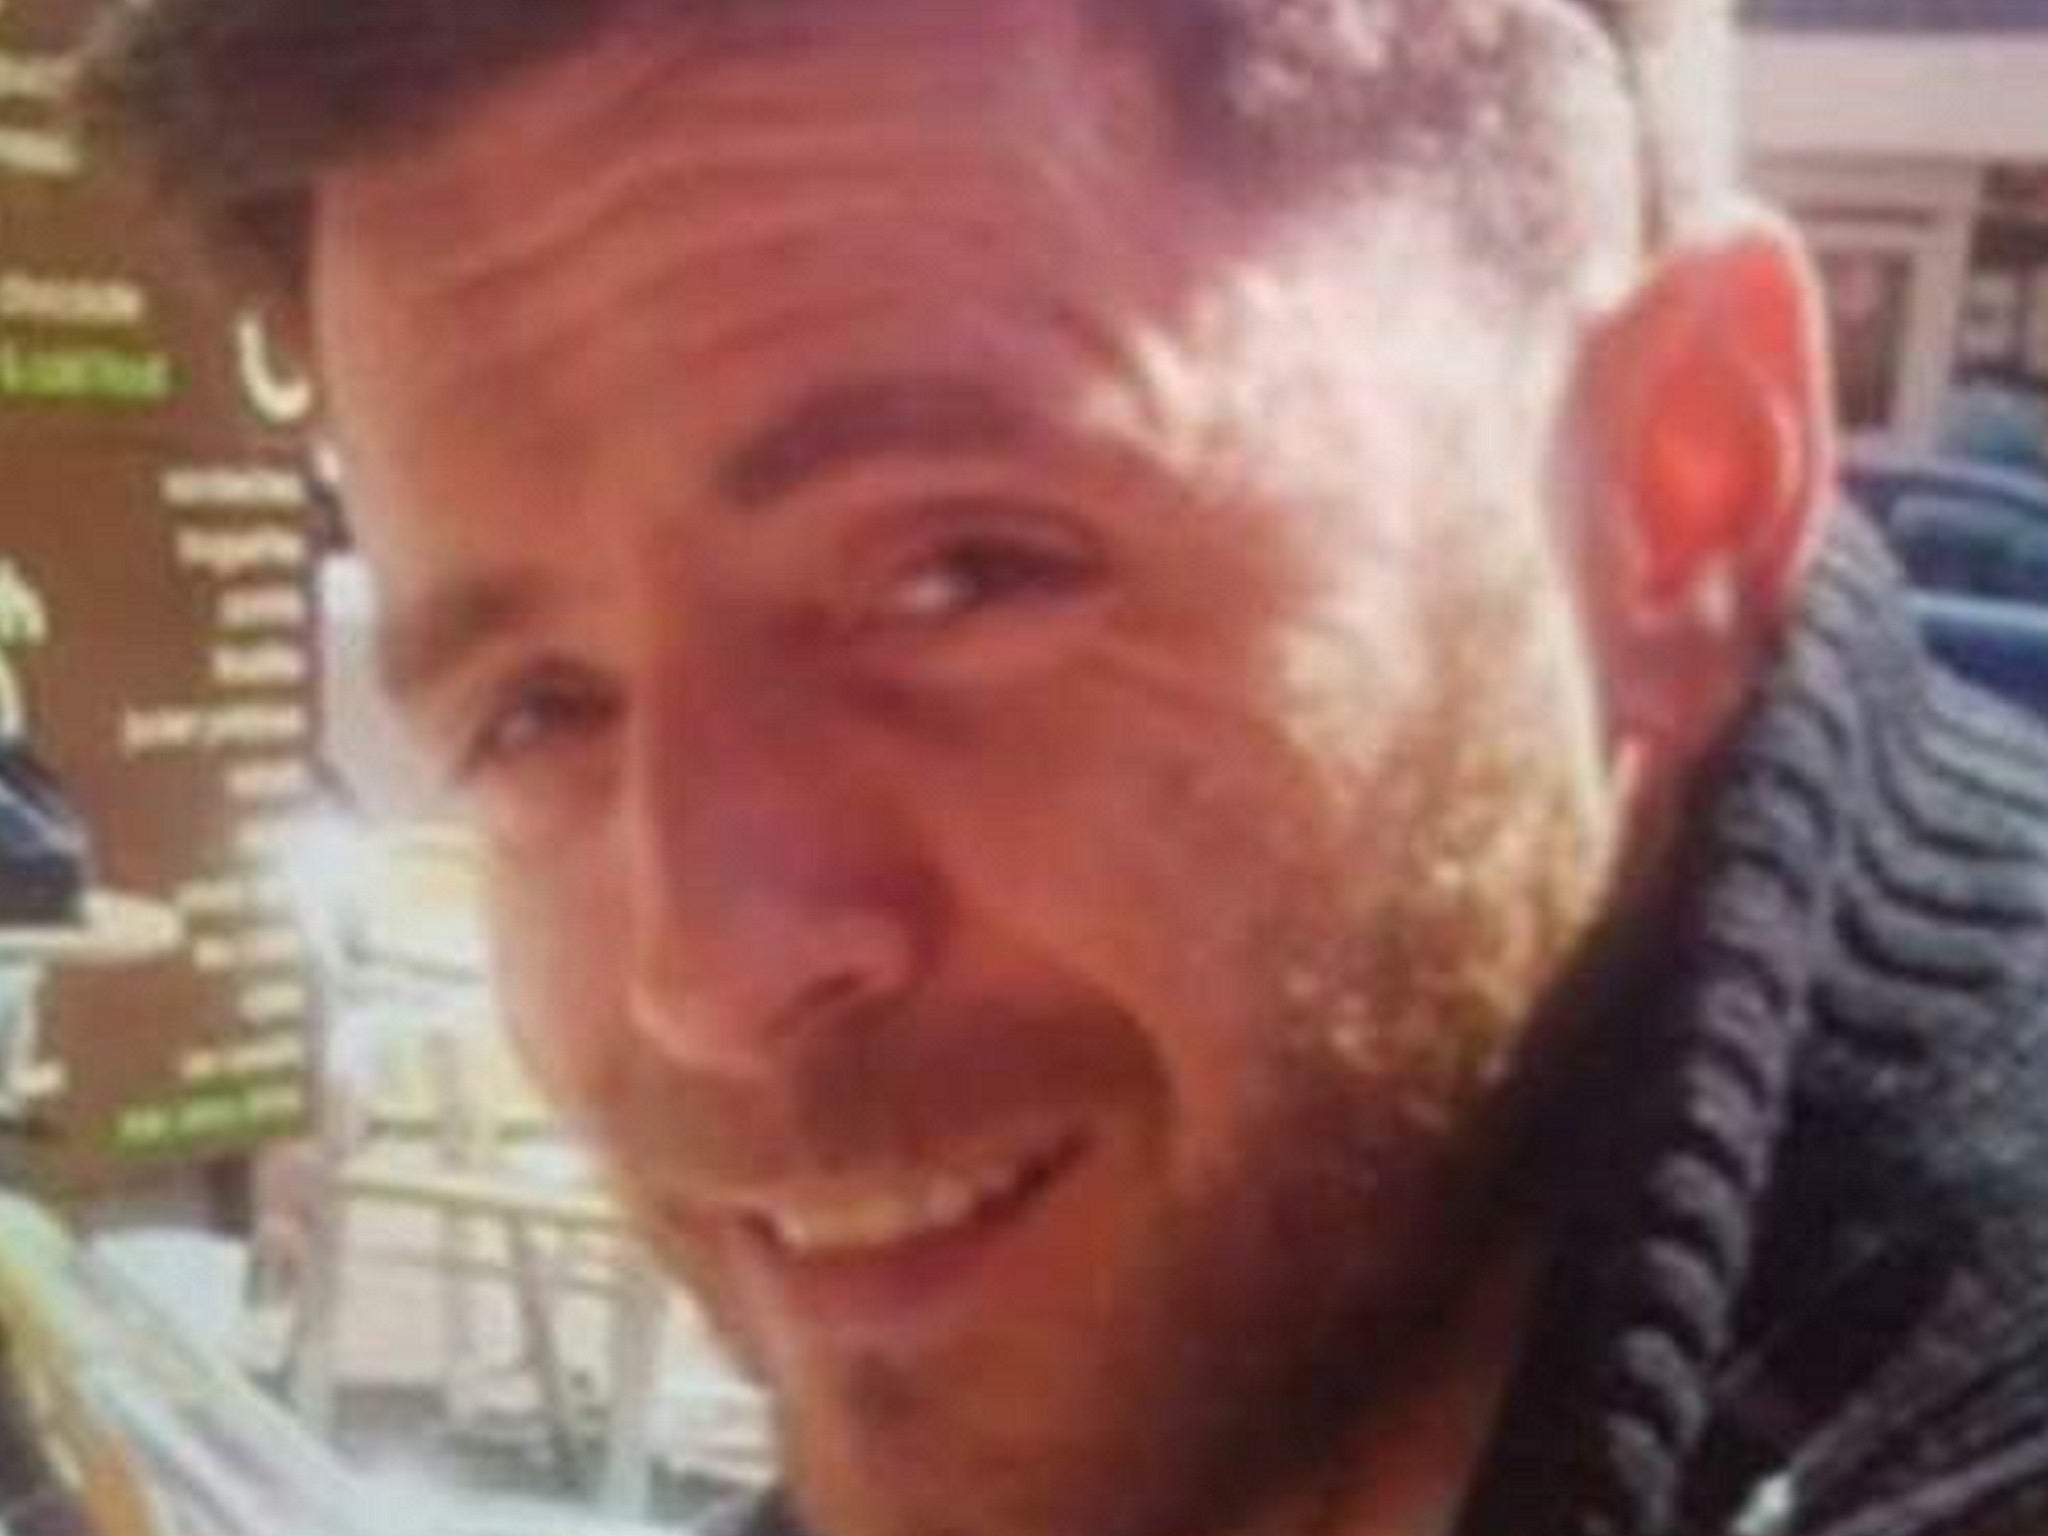 A body has been found in the search for missing Somerset man Dean Tate who went missing on 24 February